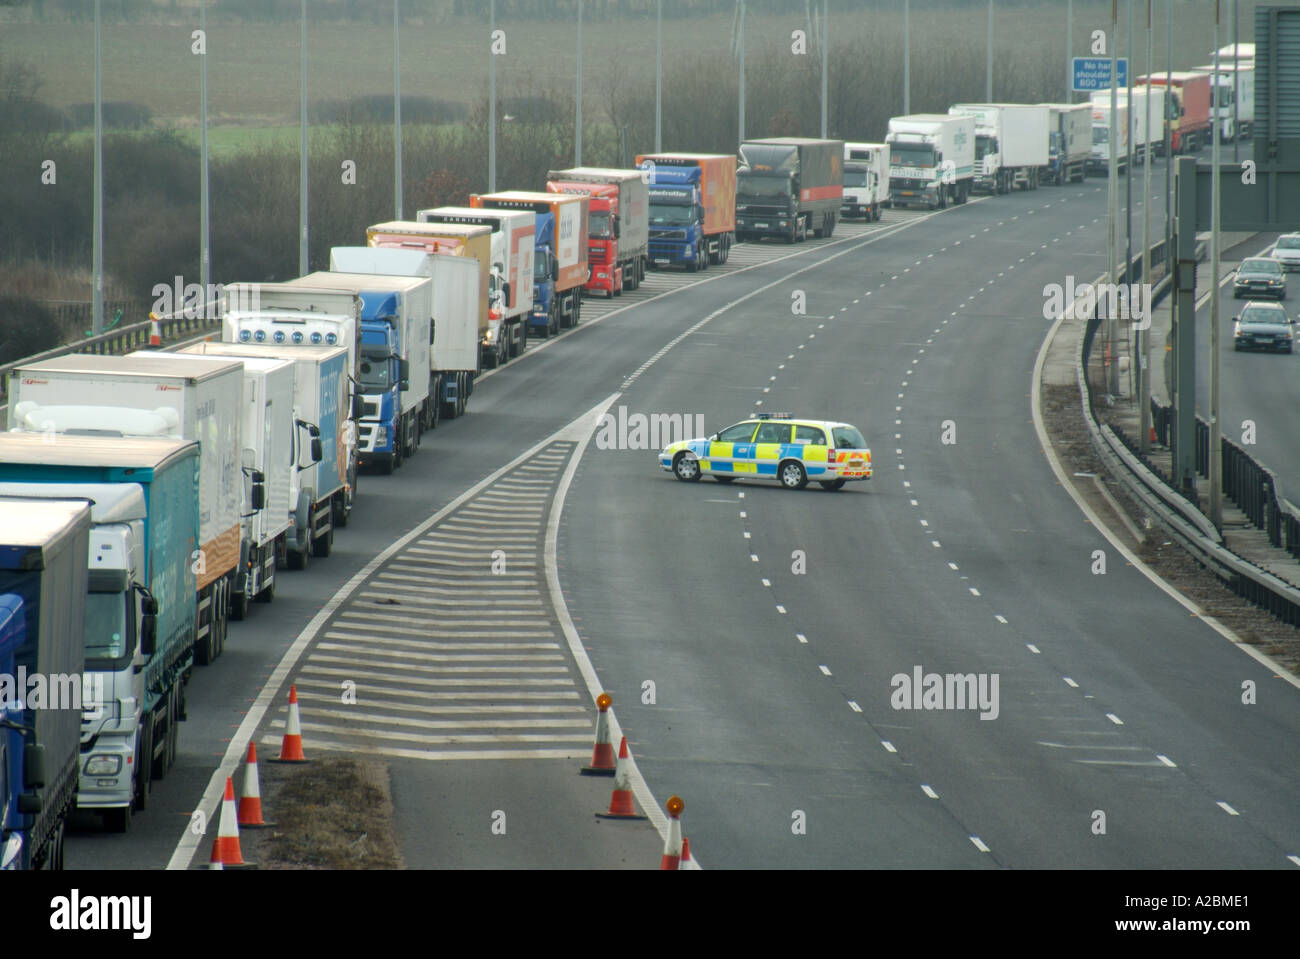 M25 motorway closed due to serious accident requiring long tailback queue of lorries to turn-around & exit in wrong direction supervised by police UK Stock Photo